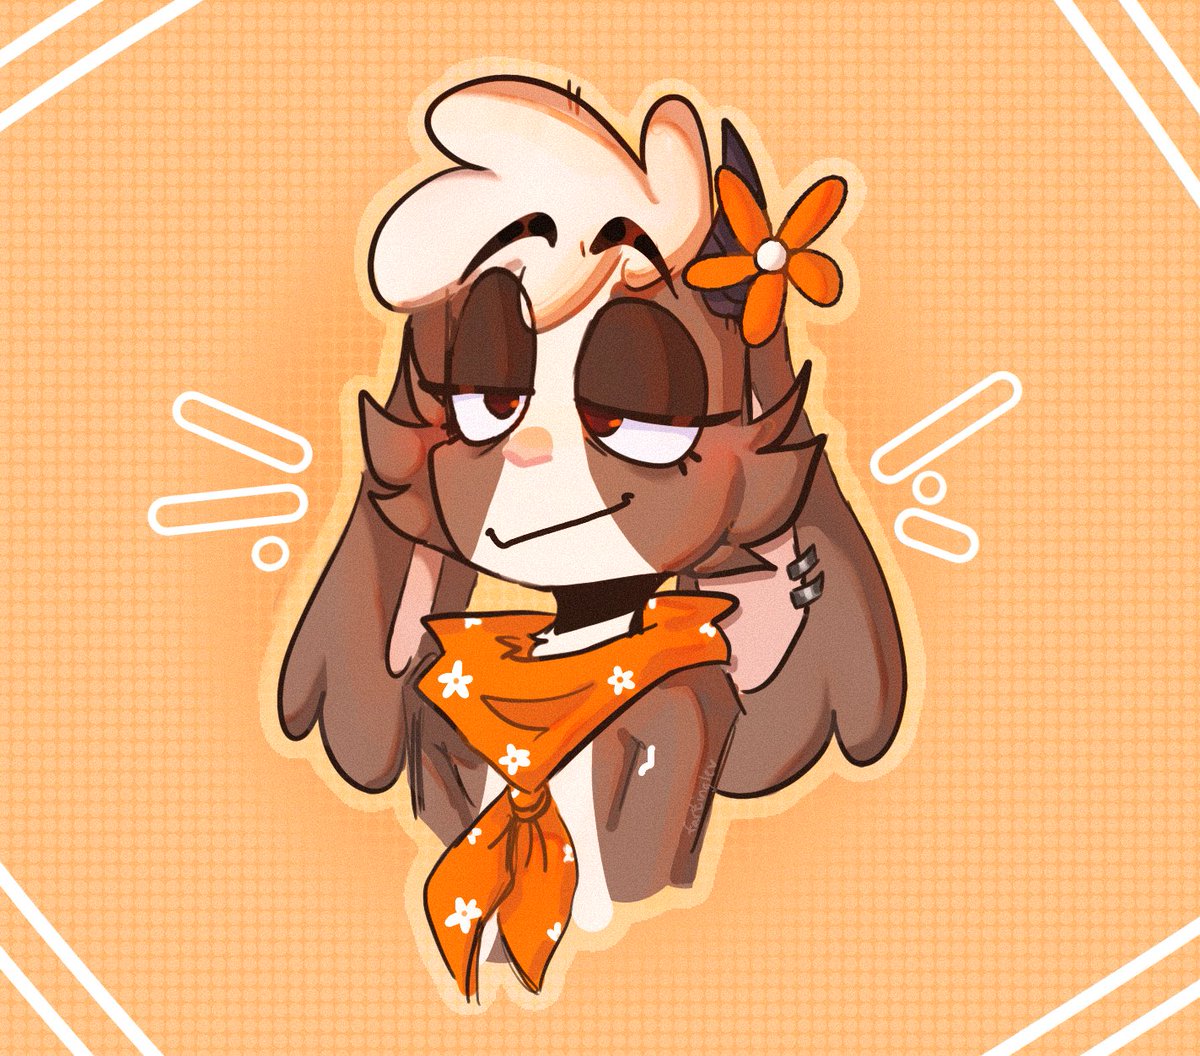 nvm dont like this artstyle that much 
test weee

#billiebustup